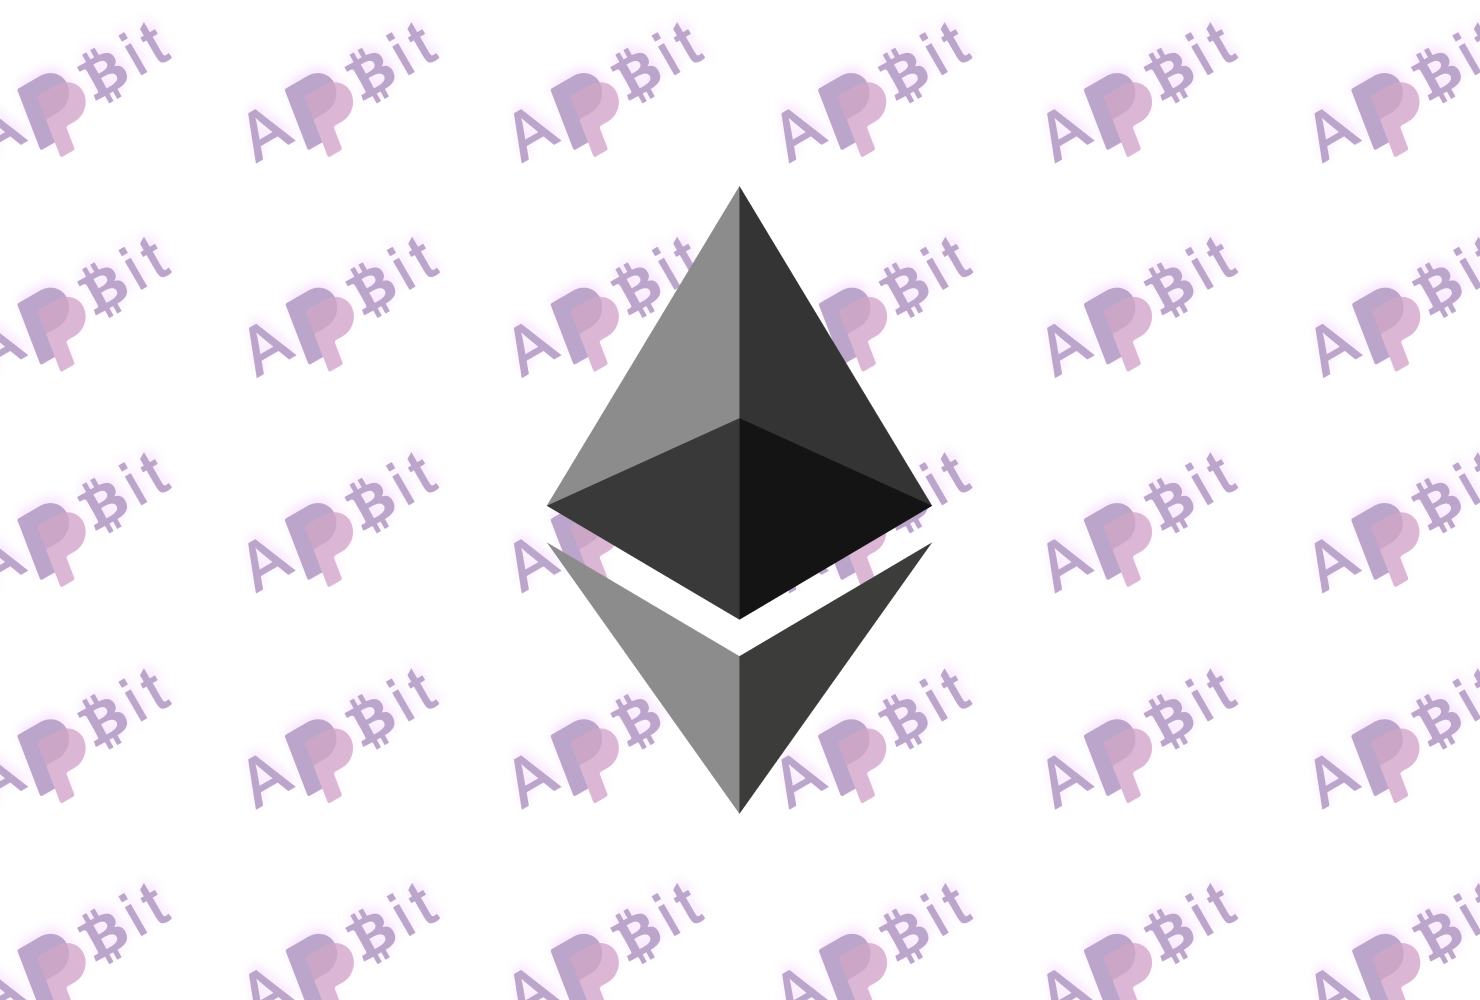 images/eth.png